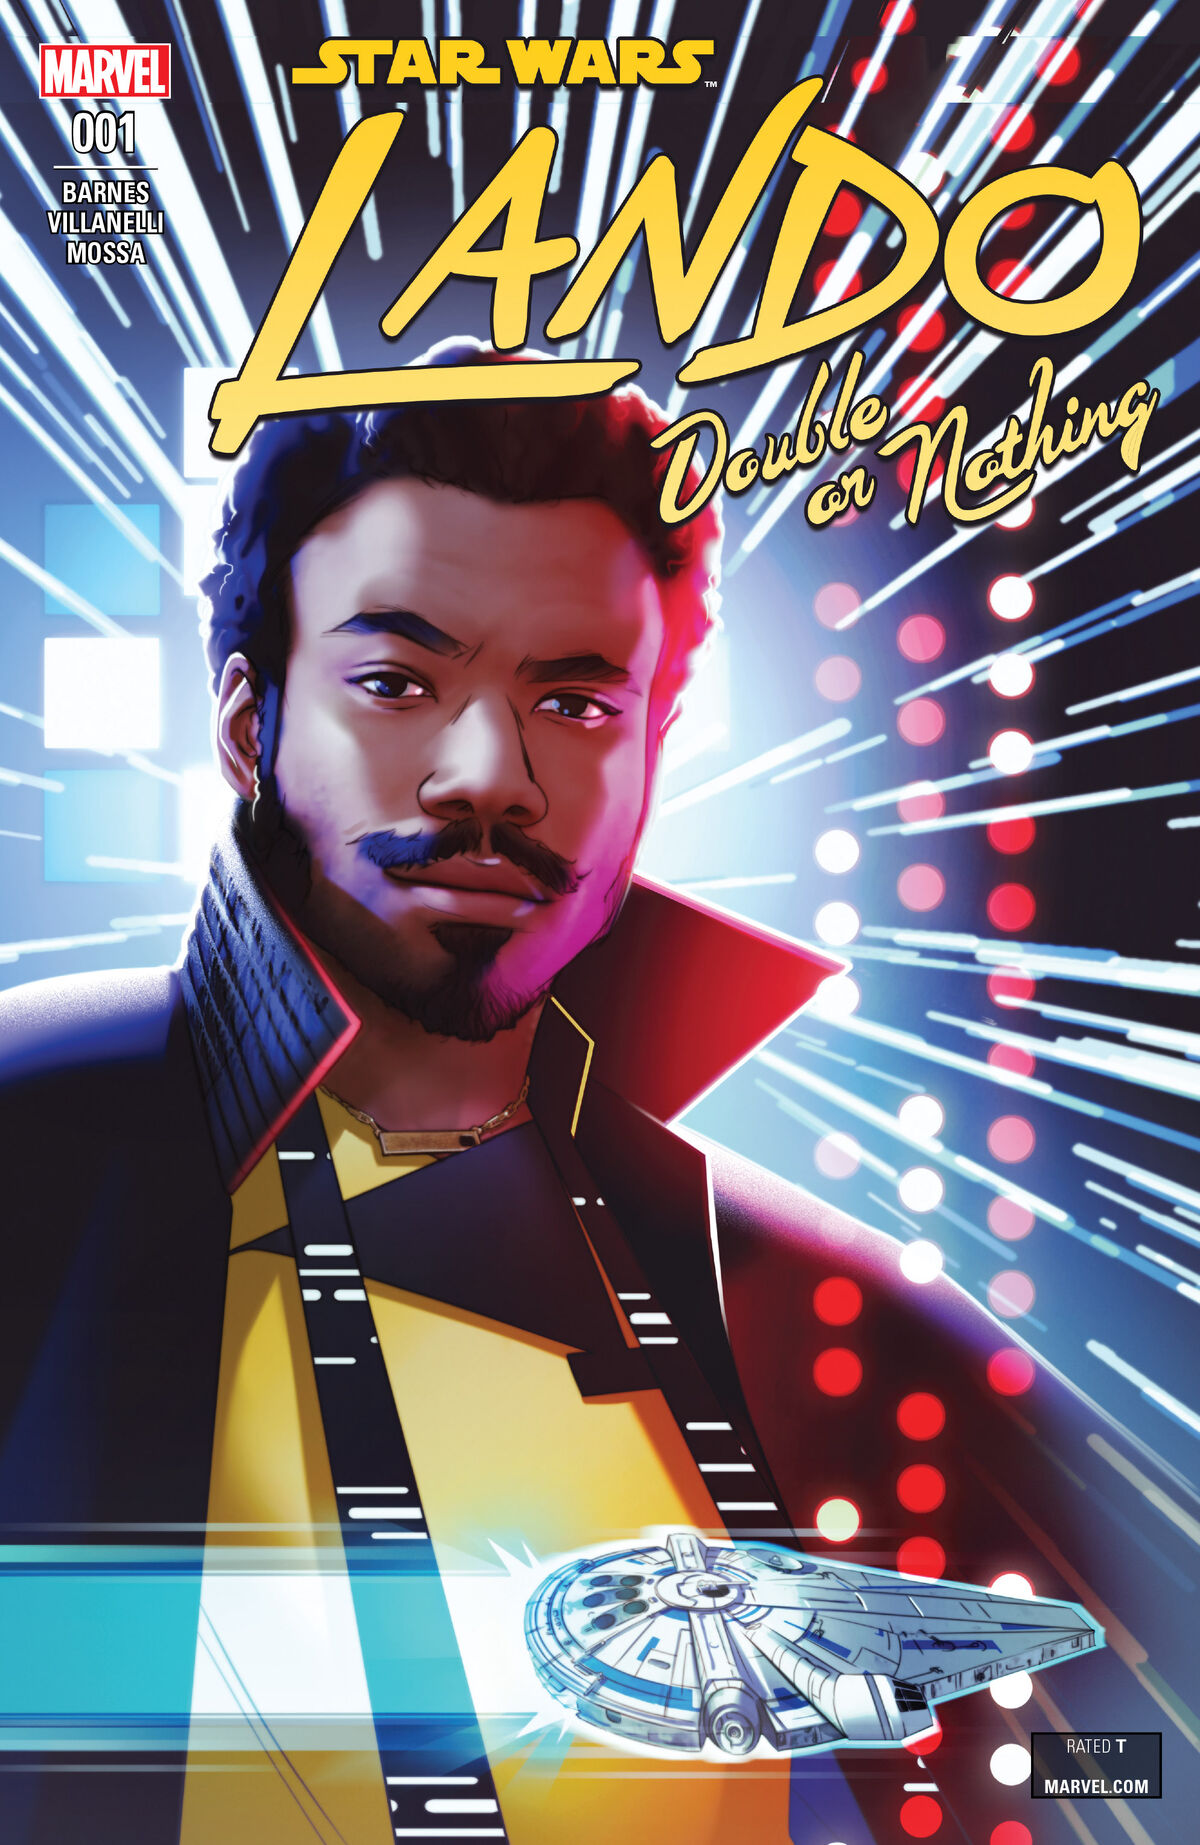 Lando - Double or Nothing 1, Wookieepedia